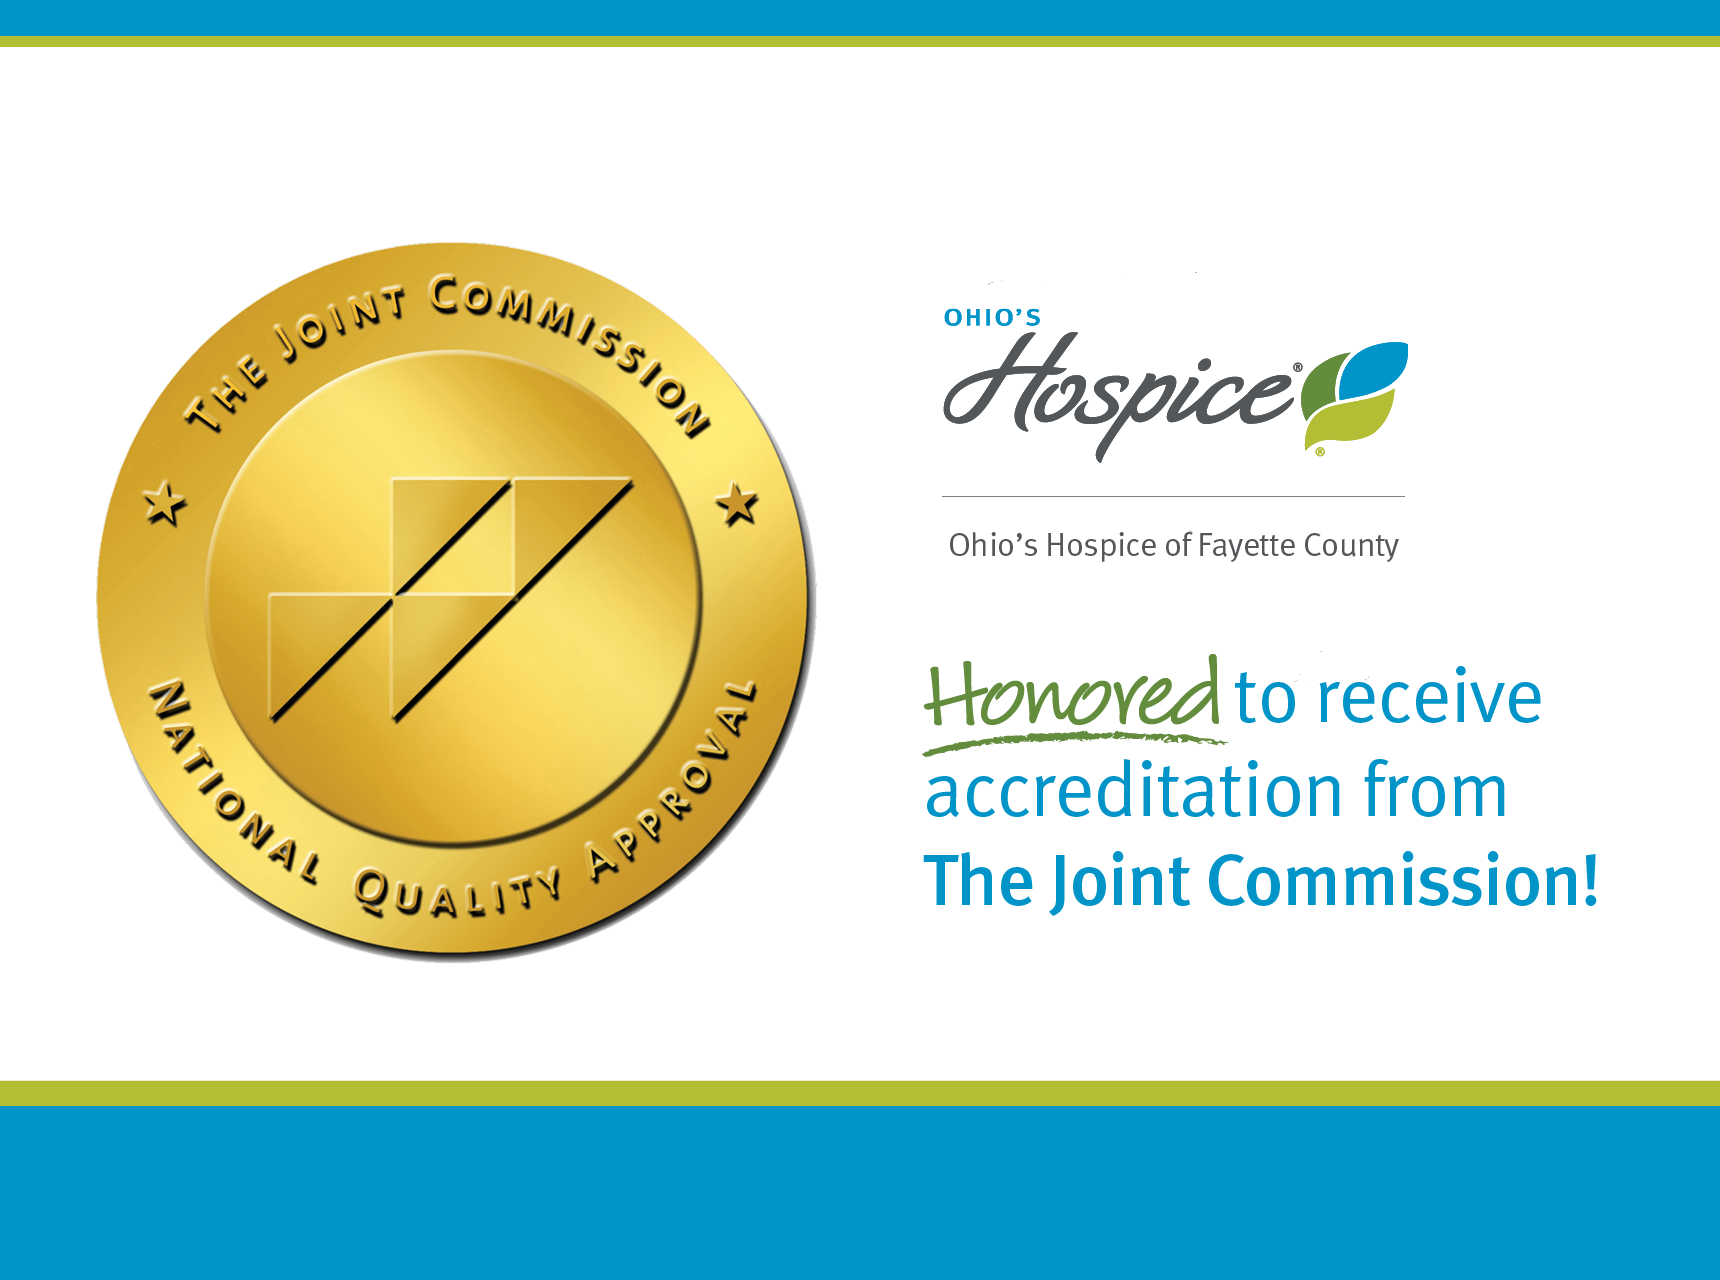 Ohio's Hospice of Fayette County. Honored to receive accreditation from The Joint Commission!